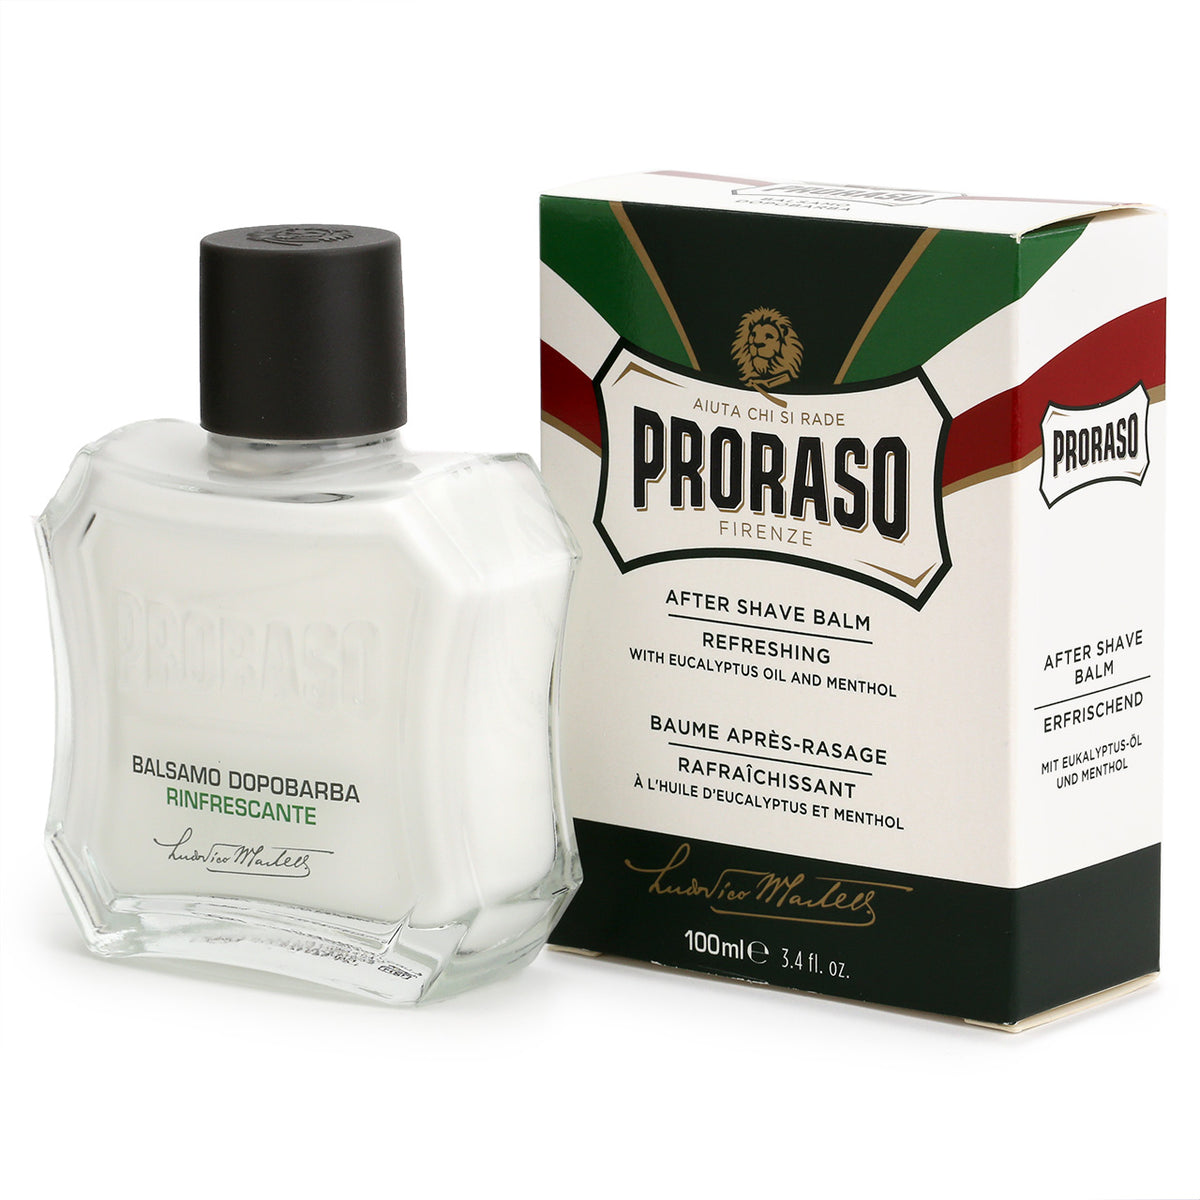 Proraso AS Balm Refreshing with Eucalyptus Oil &amp; Menthol is in a retro bottle and box